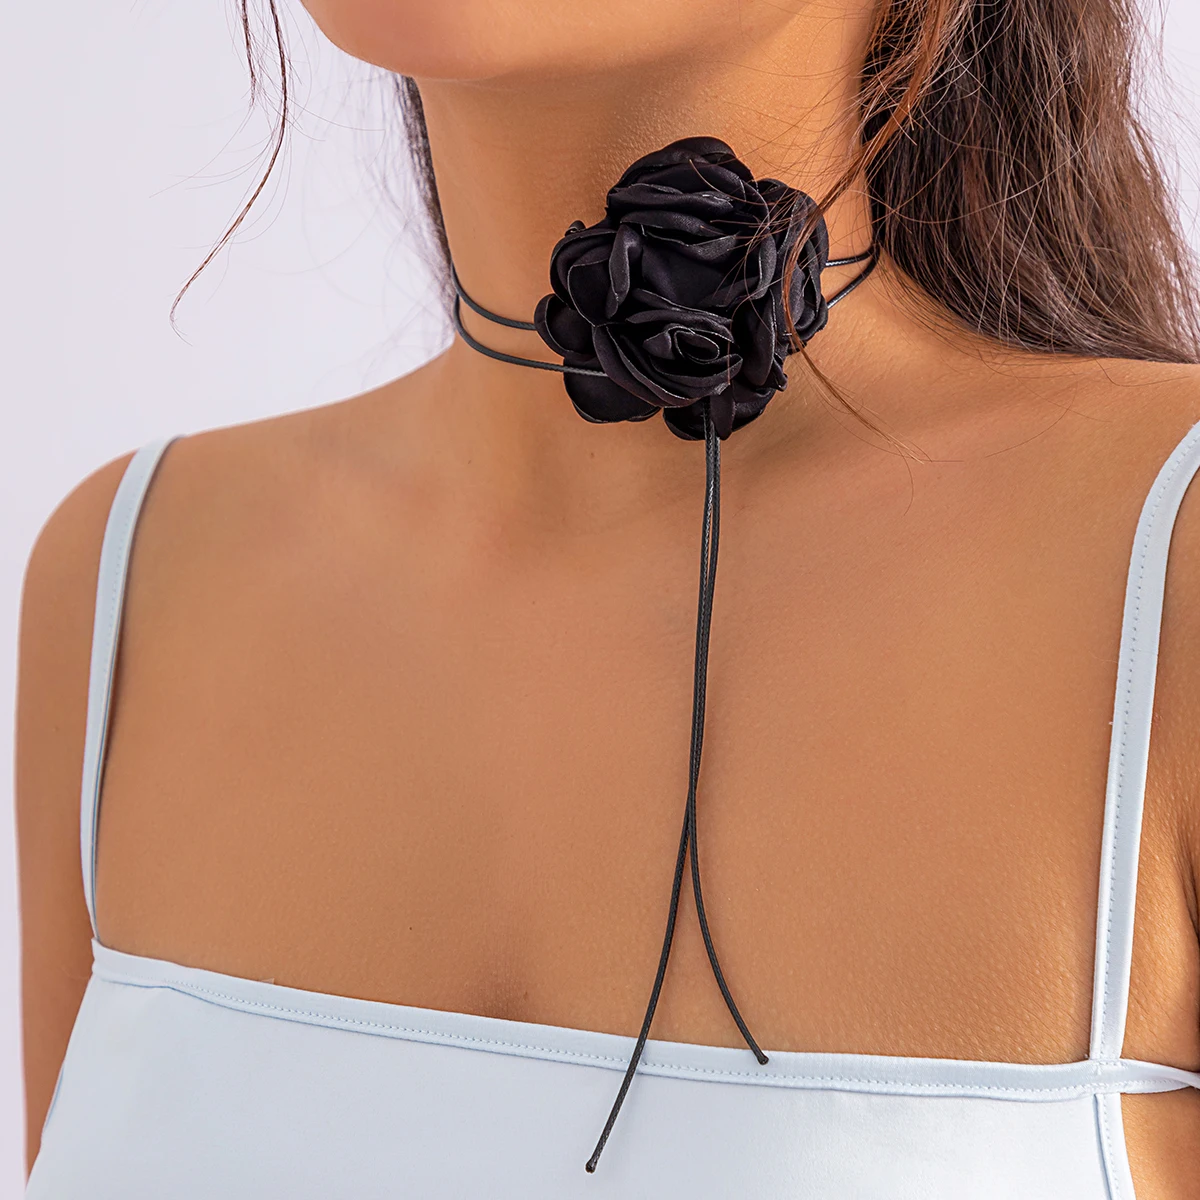 

SHIXIN Elegant Sweet Big Rose Flower Clavicle Chain Necklace for Women Korean Fashion Adjustable Rope Choker Banquet Jewelry